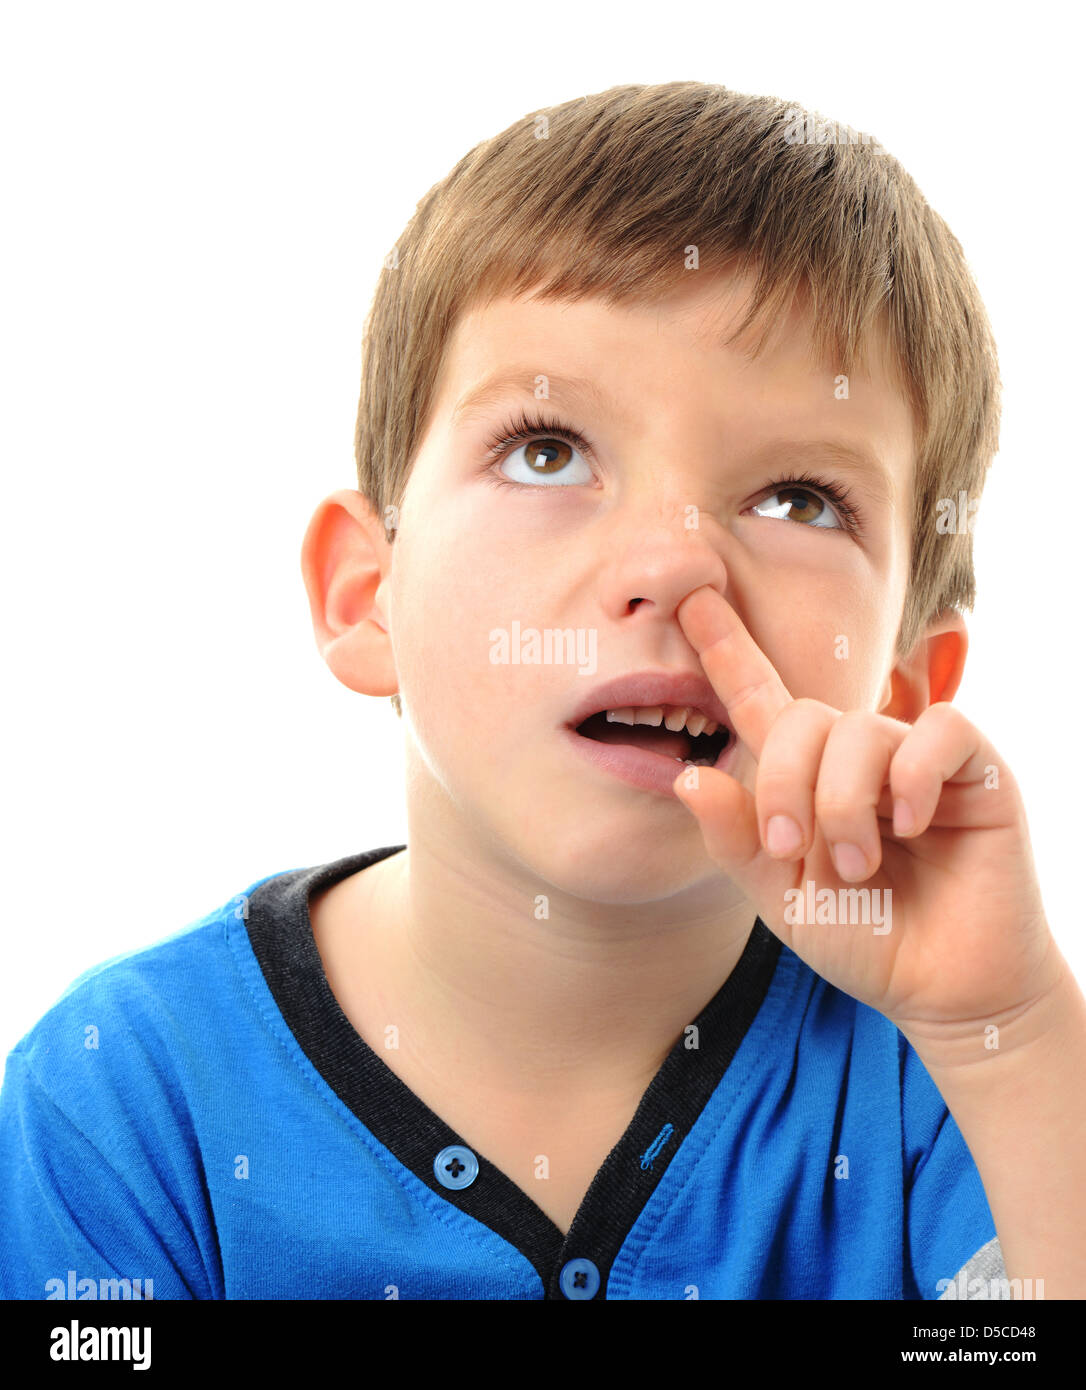 Boy picking his nose, young child picking their nose Stock Photo